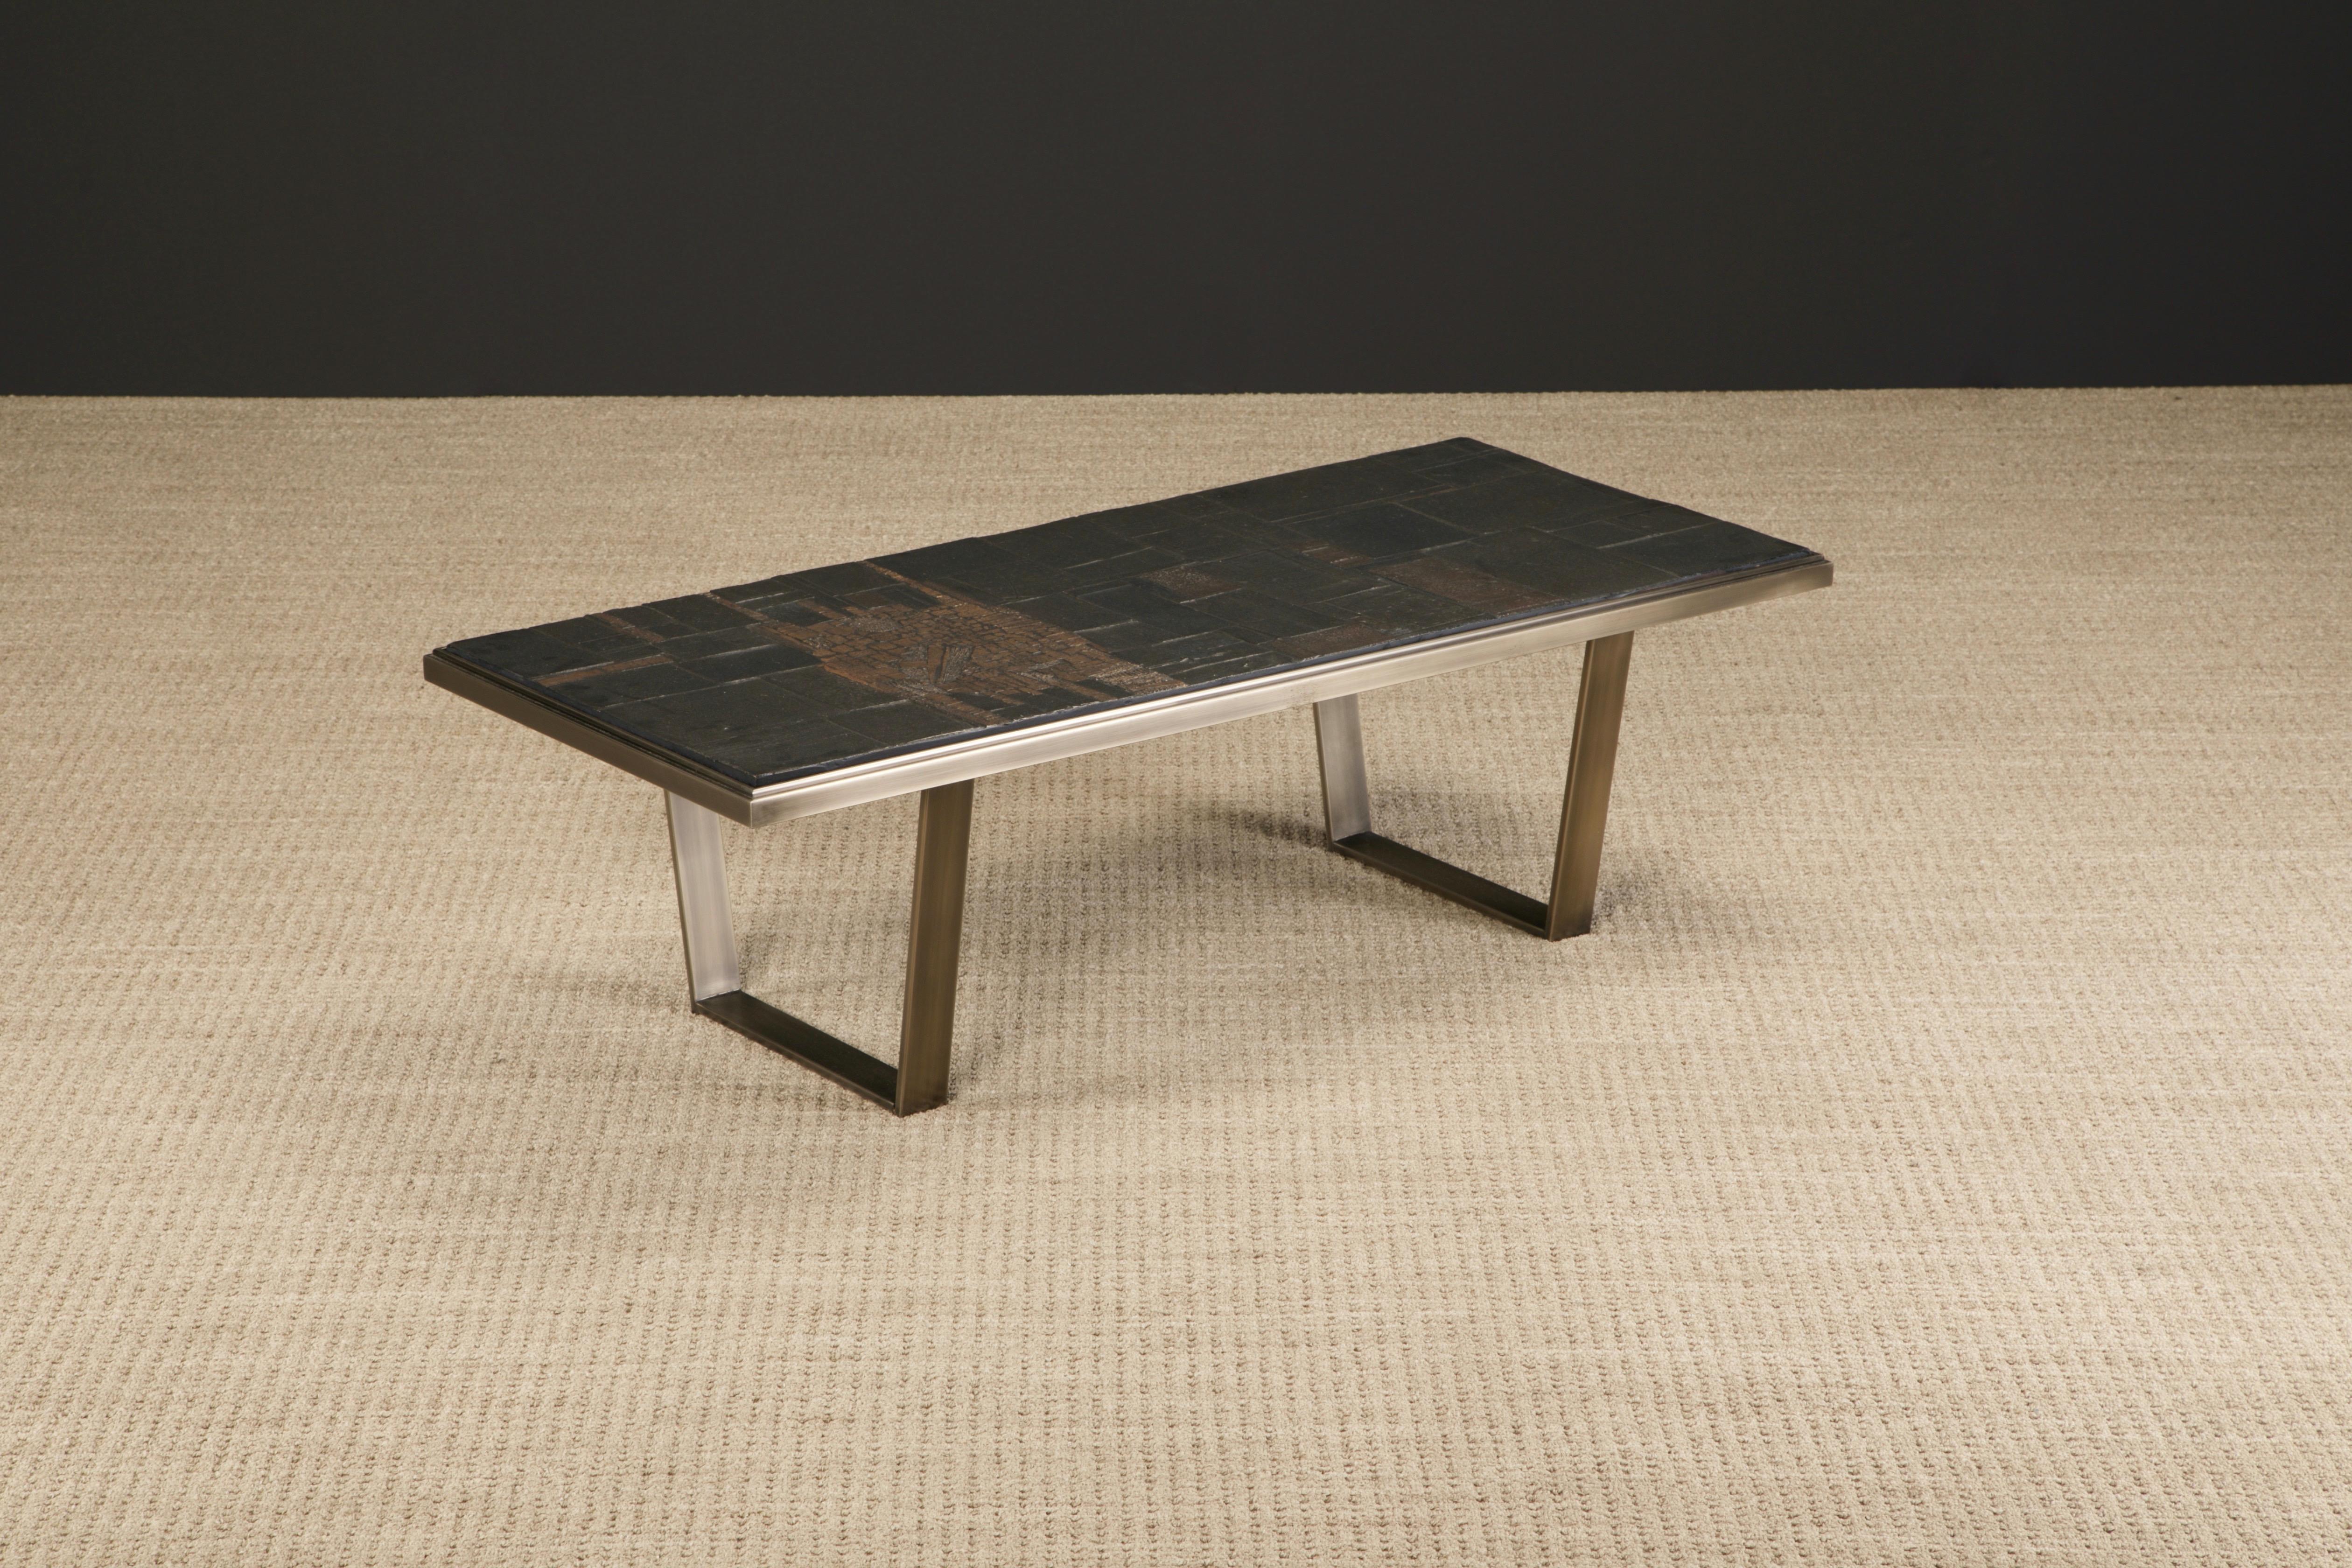 An incredible Pia Manu brutalist coffee table, circa 1965-1970s, with brutalist cast resin artwork top over a brushed copper-tone steel frame and base. This stunning piece of functional art is signed on top 'Pia Manu'. Excellent cocktail table for